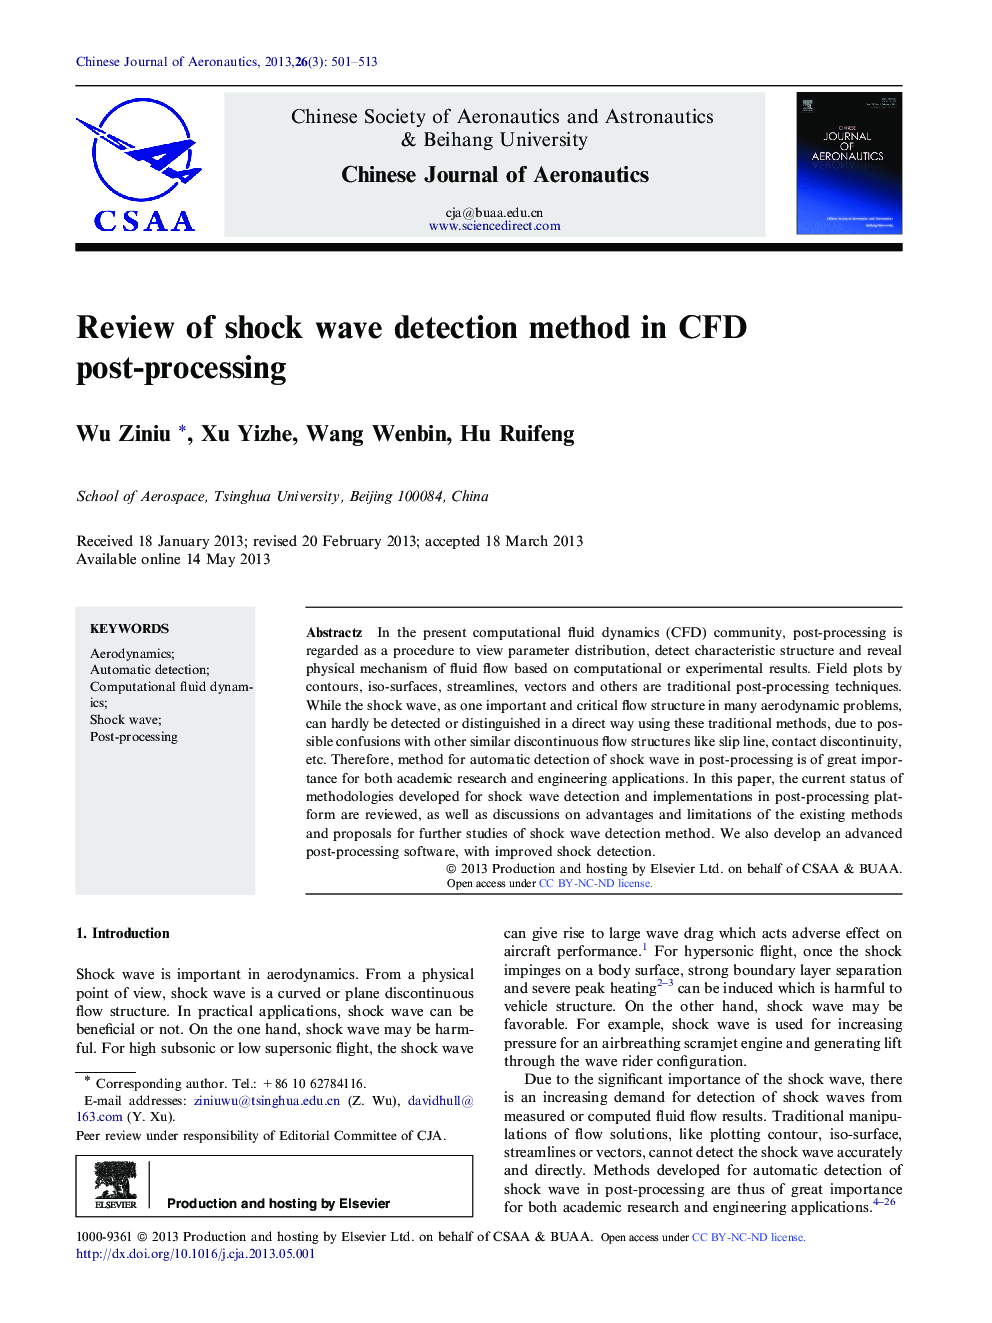 Review of shock wave detection method in CFD post-processing 